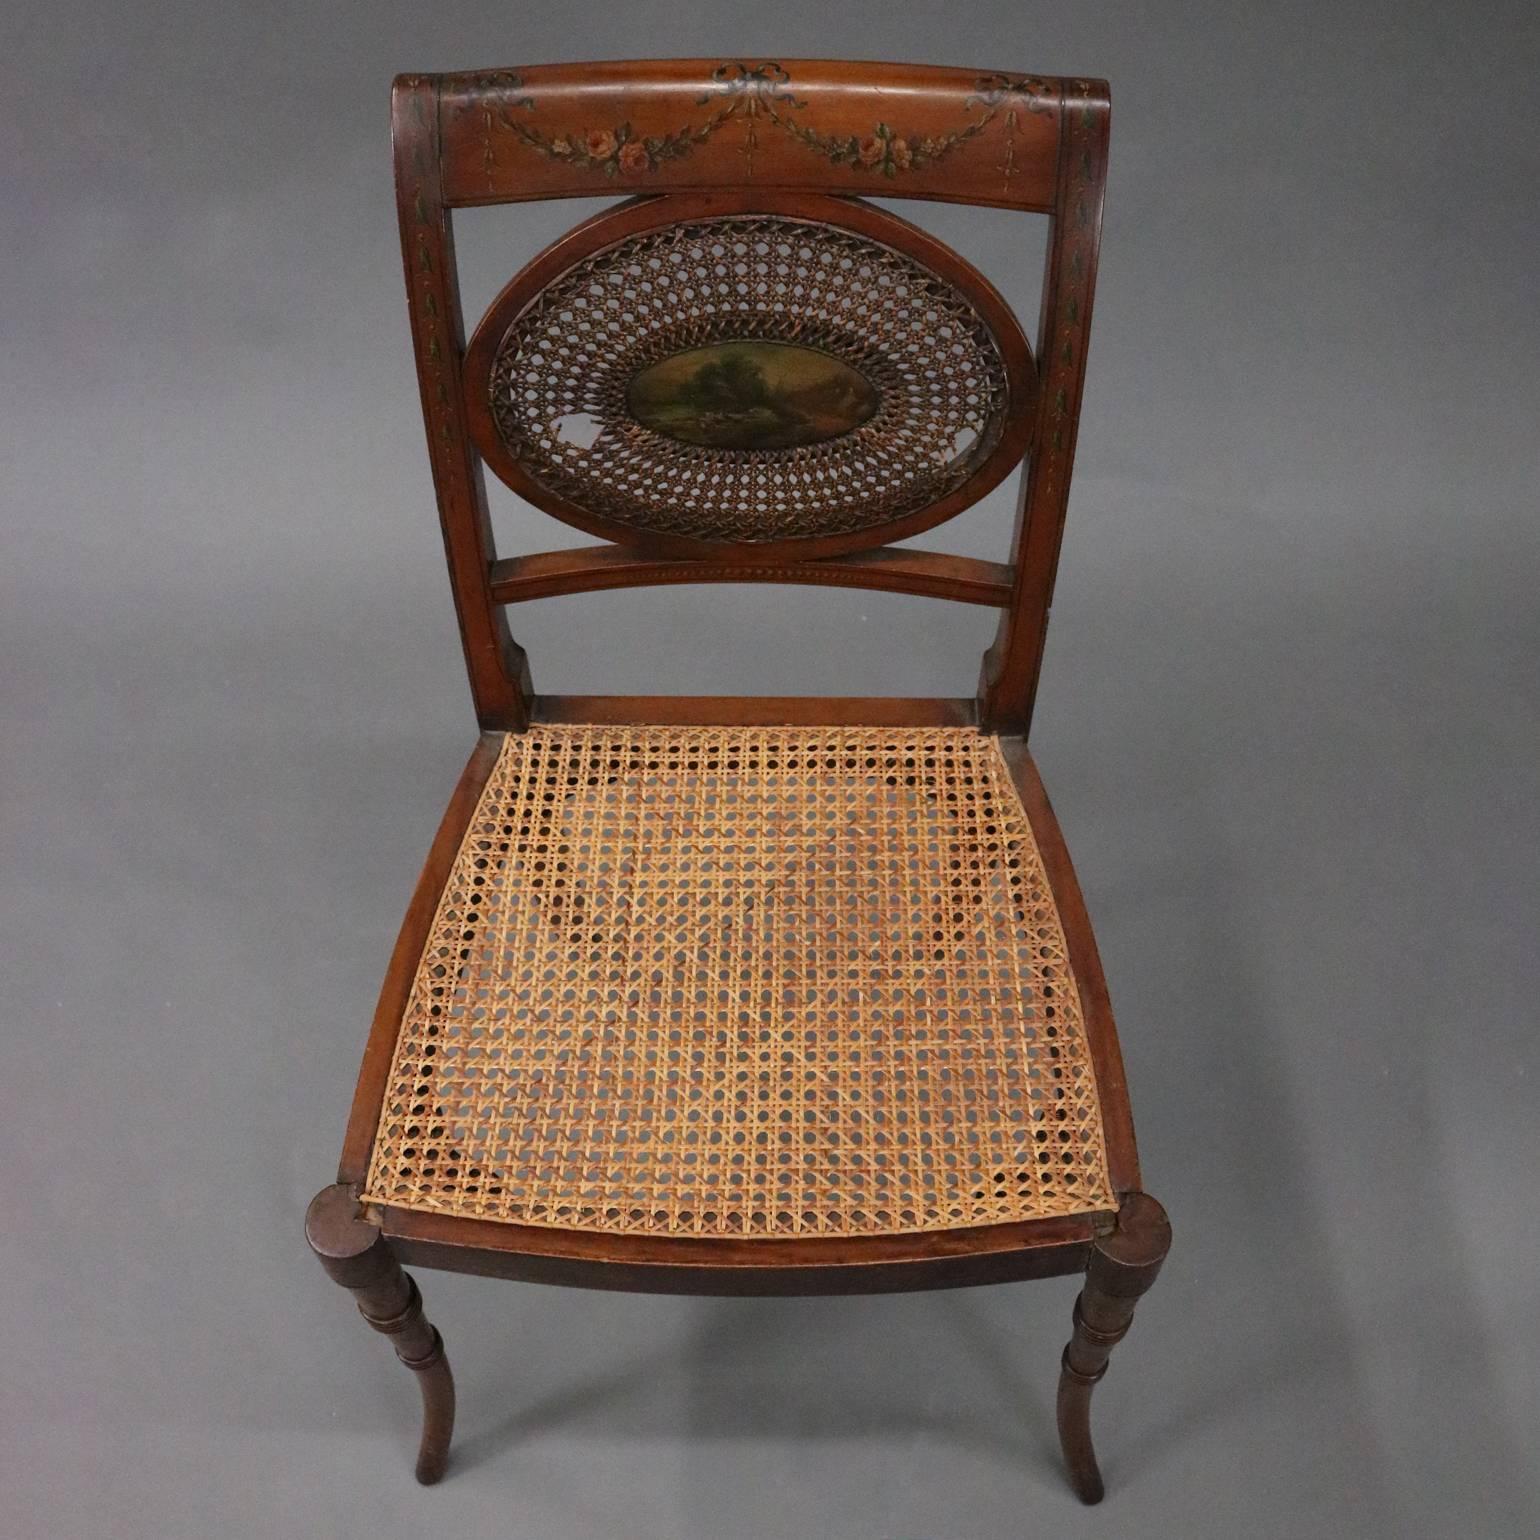 Antique English Regency Hand-Painted and Caned Mahogany Side Chair, circa 1890 (20. Jahrhundert)